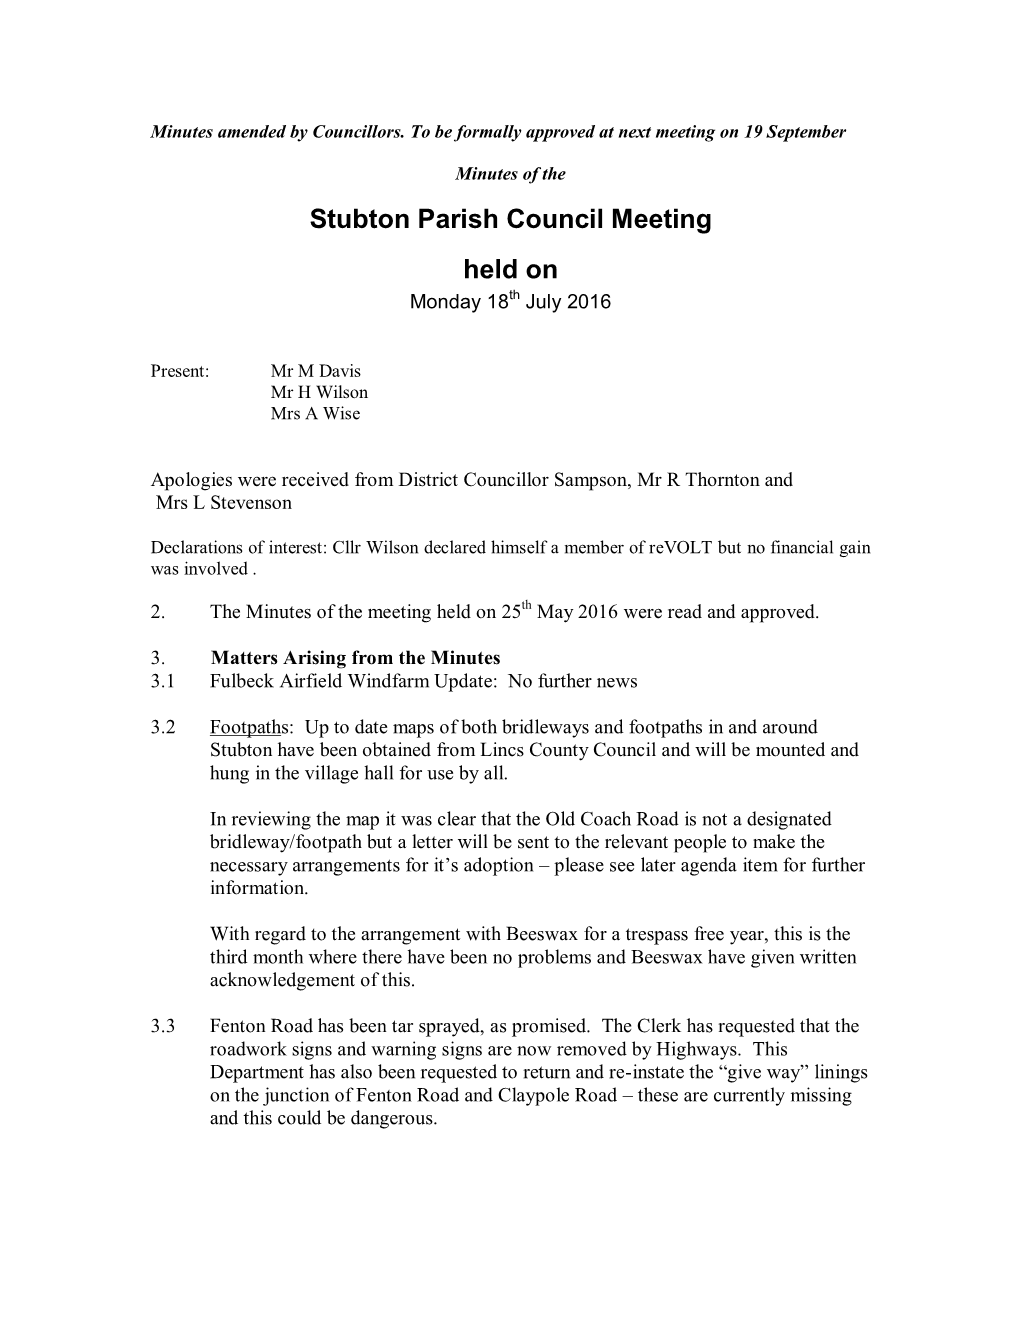 Minutes of the Stubton Parish Council Meeting Held on Monday 18Th July 2016